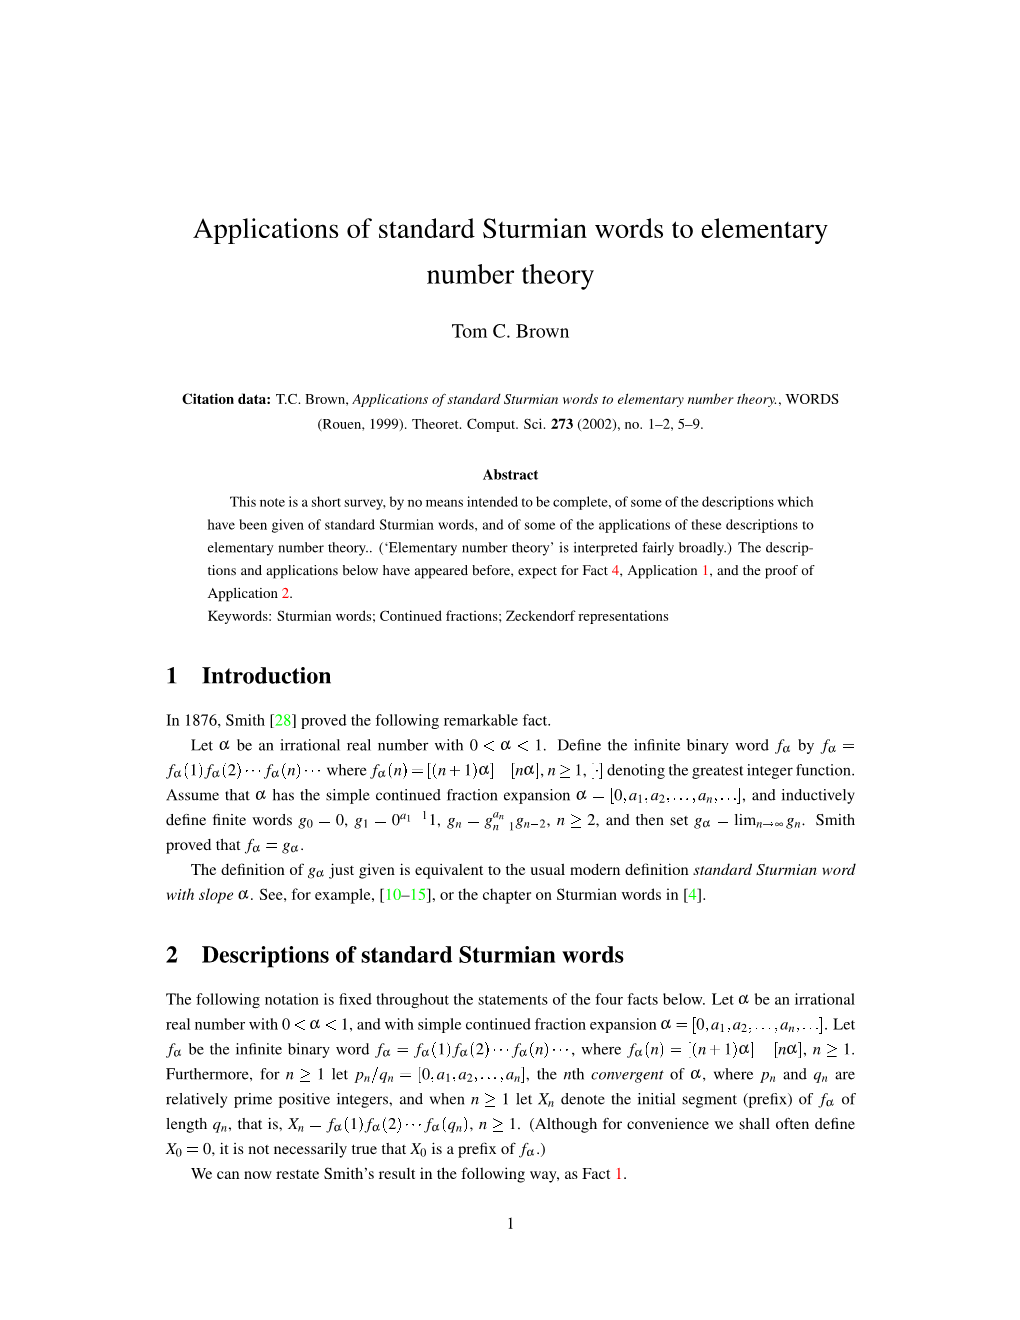 Applications of Standard Sturmian Words to Elementary Number Theory